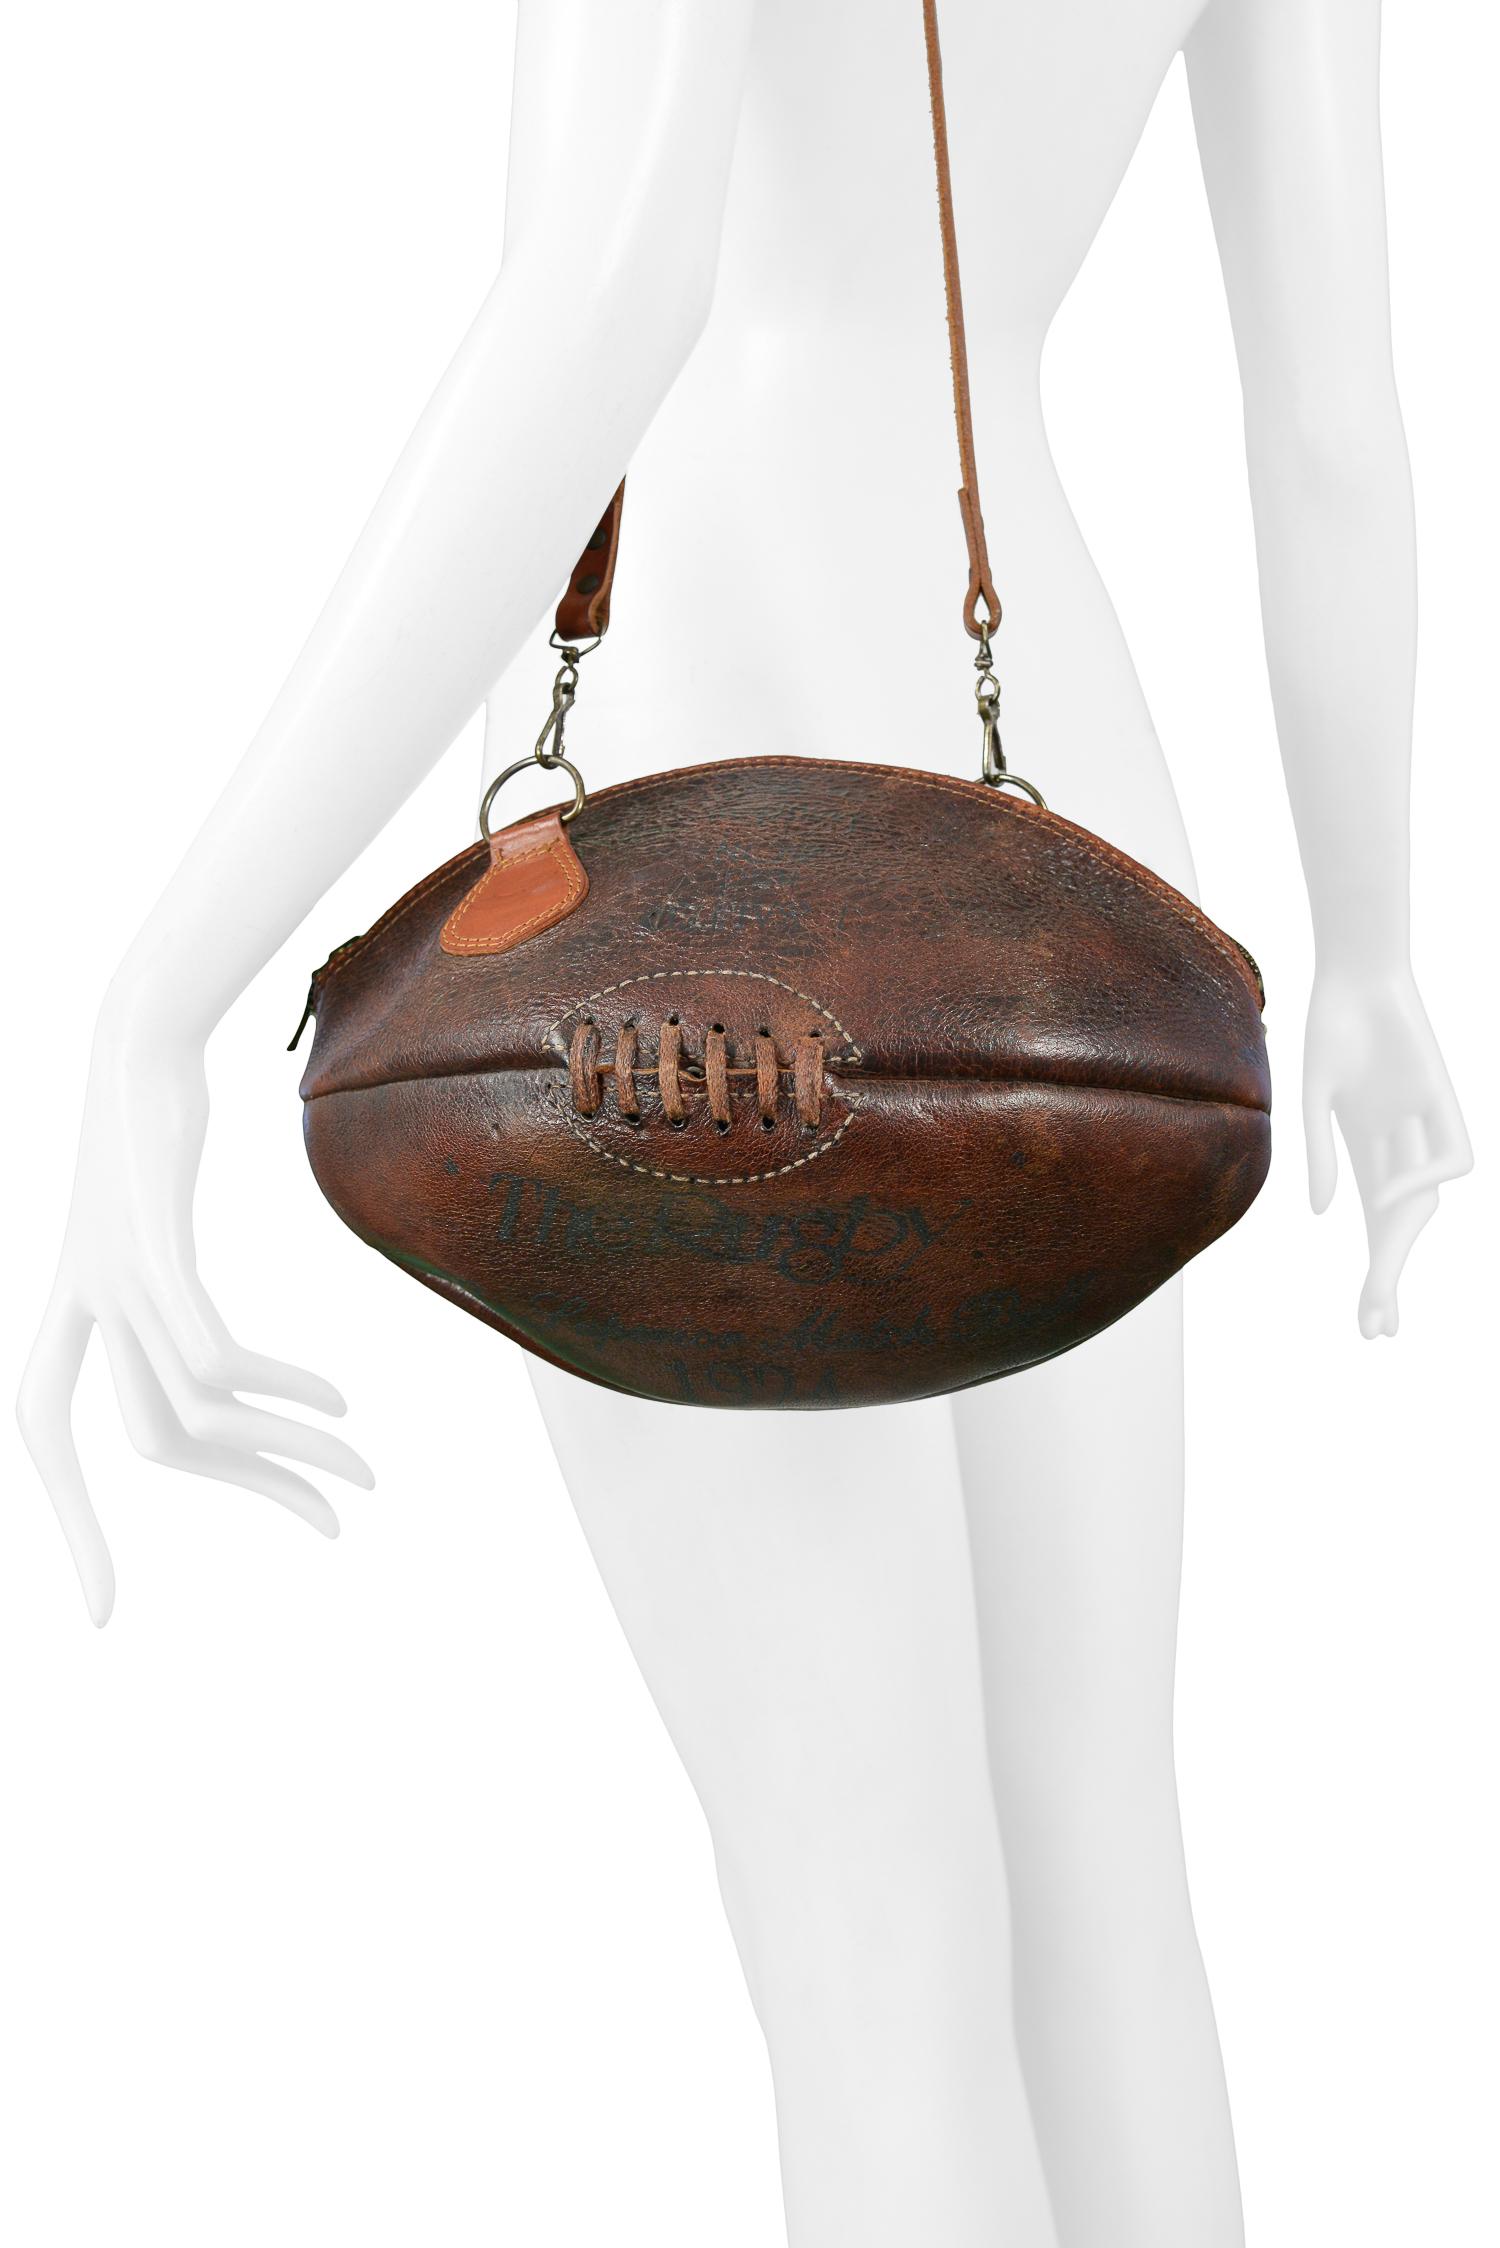 A rare and unusual vintage Maison Martin Margiela artisanal 0-collection rugby ball bag made from a vintage ball. The bag features a zipper closure, text graphic, and cross body strap. From the 2003 collection. 

Excellent Vintage Condition.